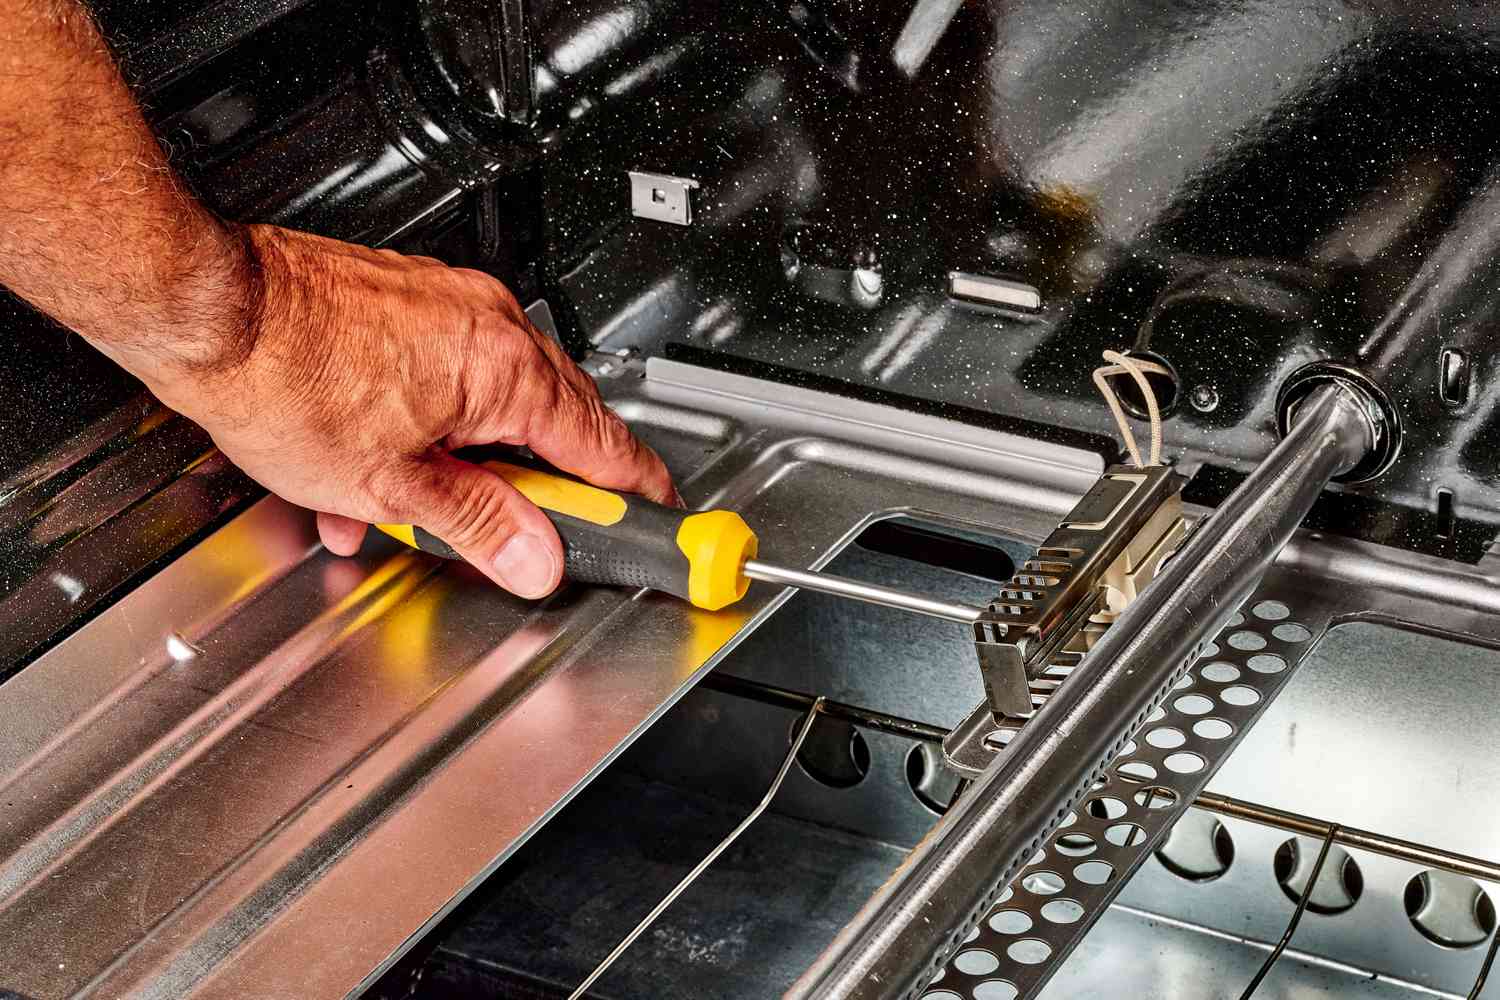 Screwdriver loosening gas oven ignitor for removal